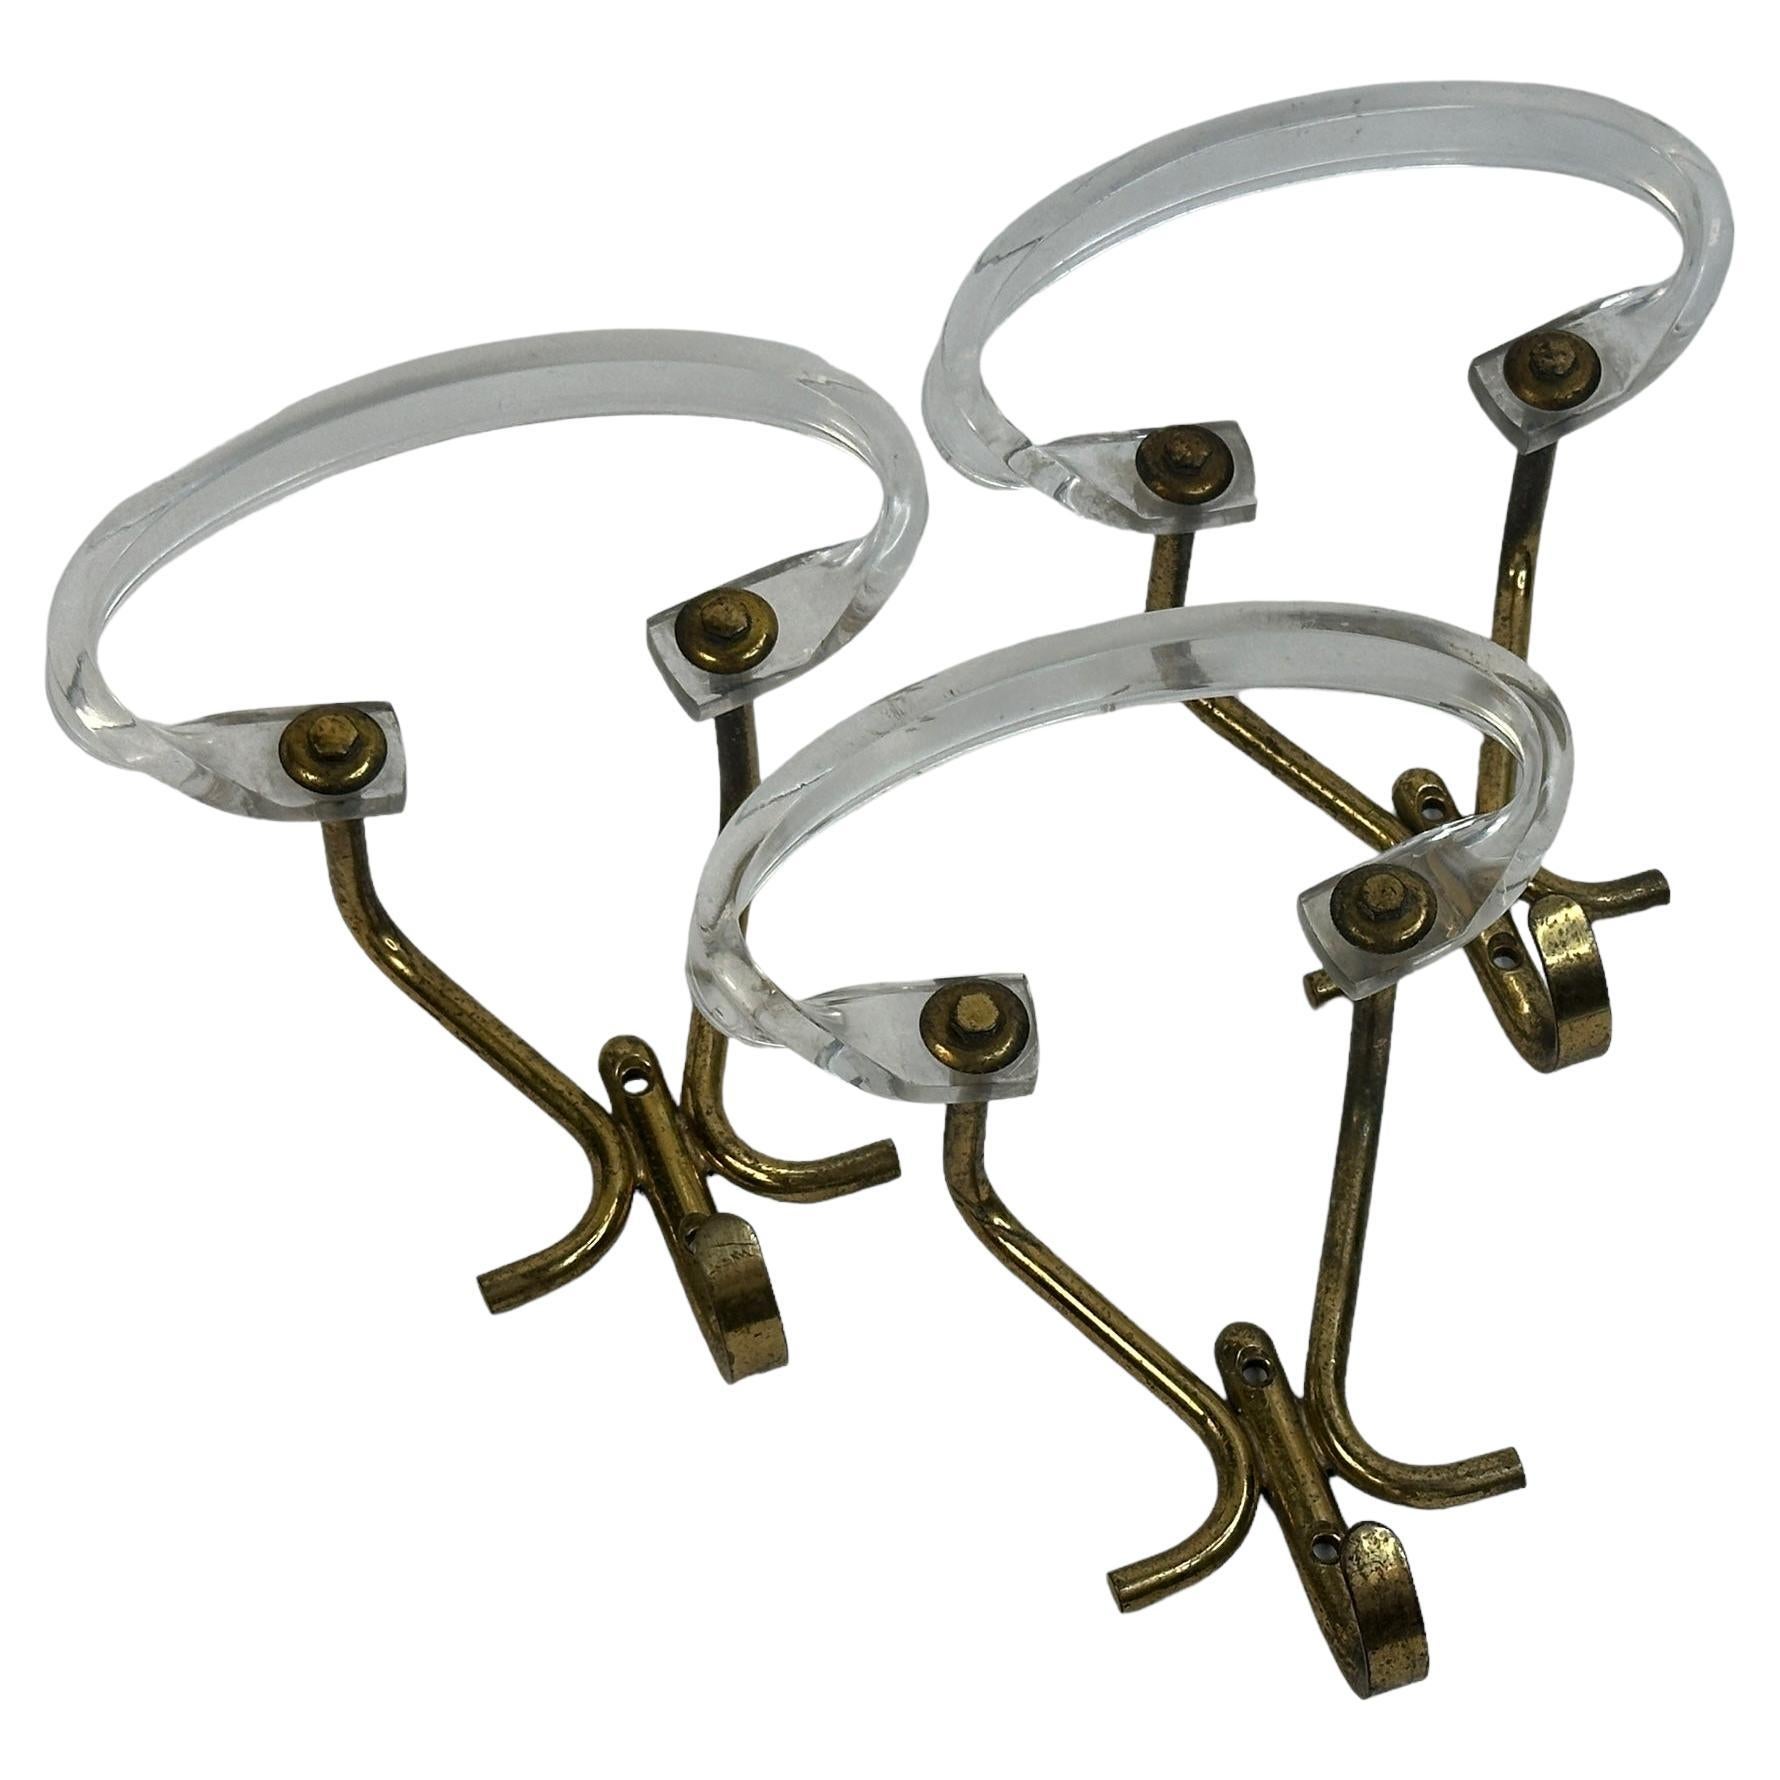 Set of Three Wall Coat Hooks, Lucite and Brass, Mid-Century Modern, 1960s For Sale